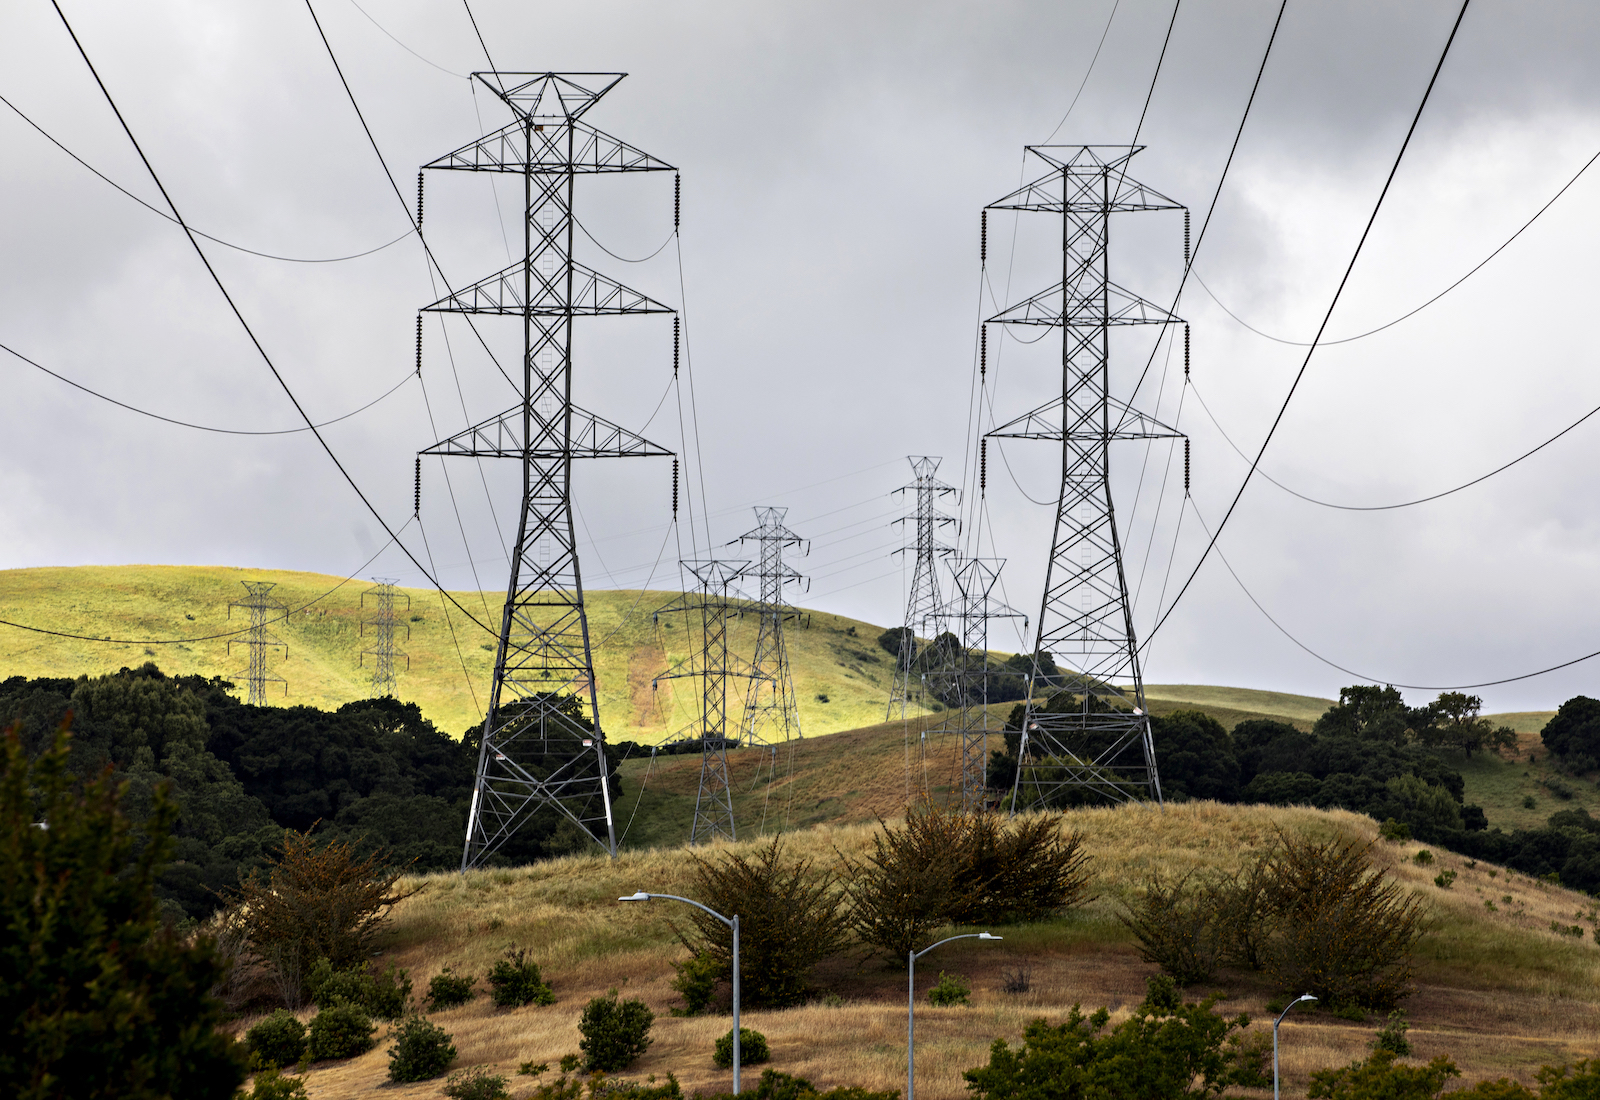 Transmission cables on rolling hills and cloudy skies